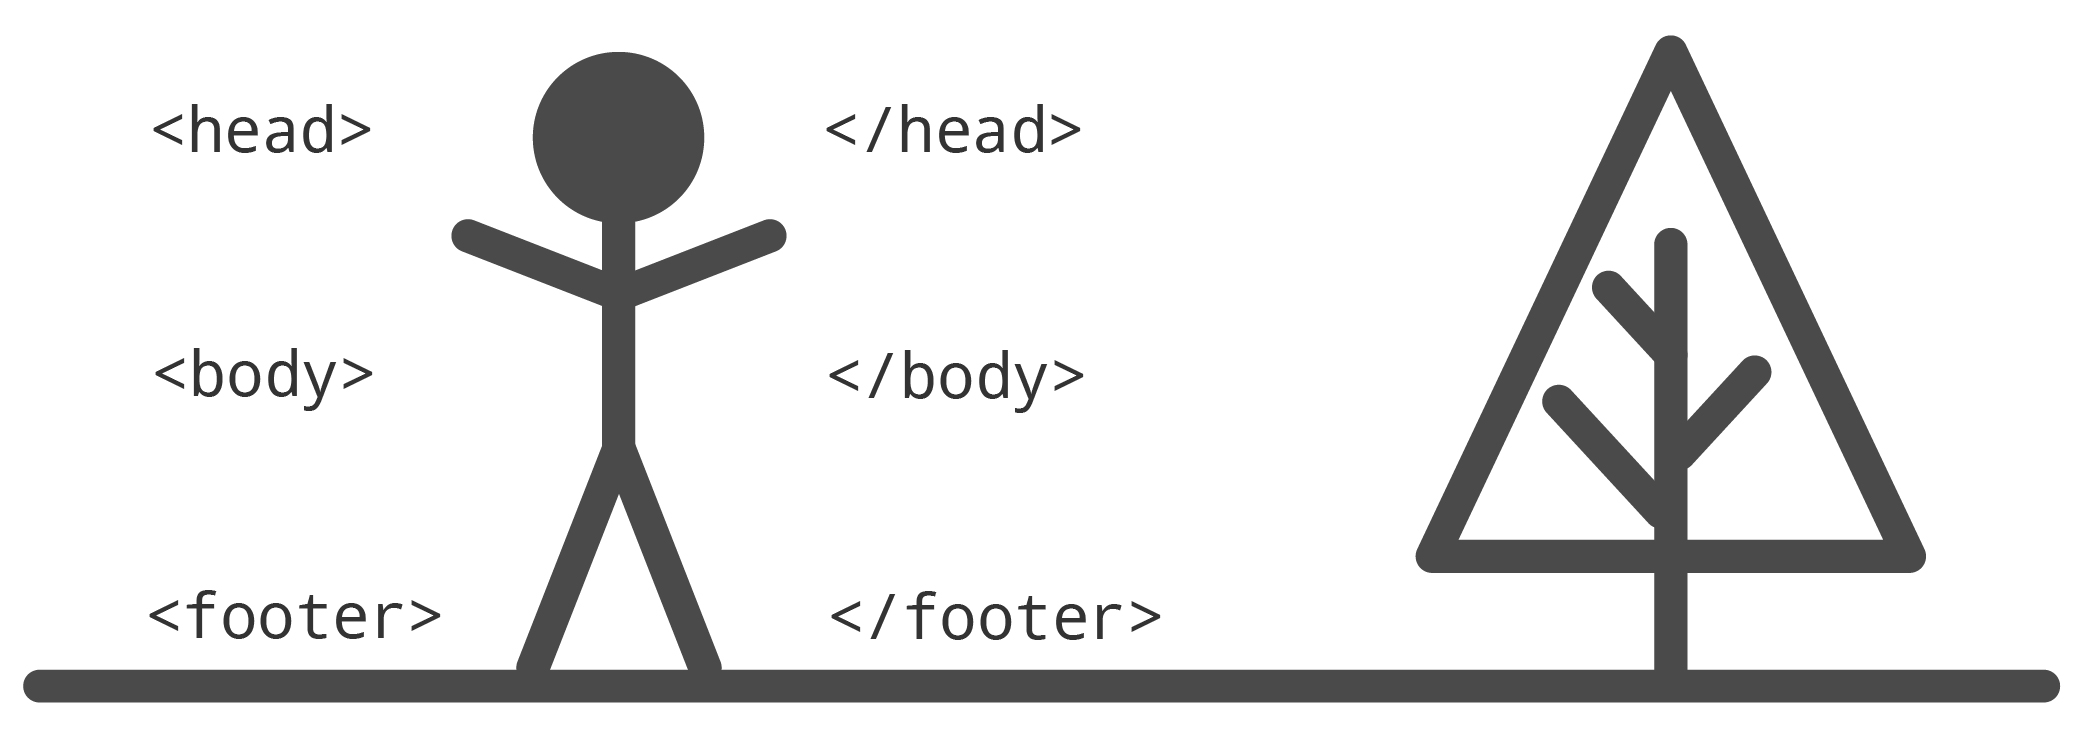 Stick figure labeled with head, body, and footer html tags